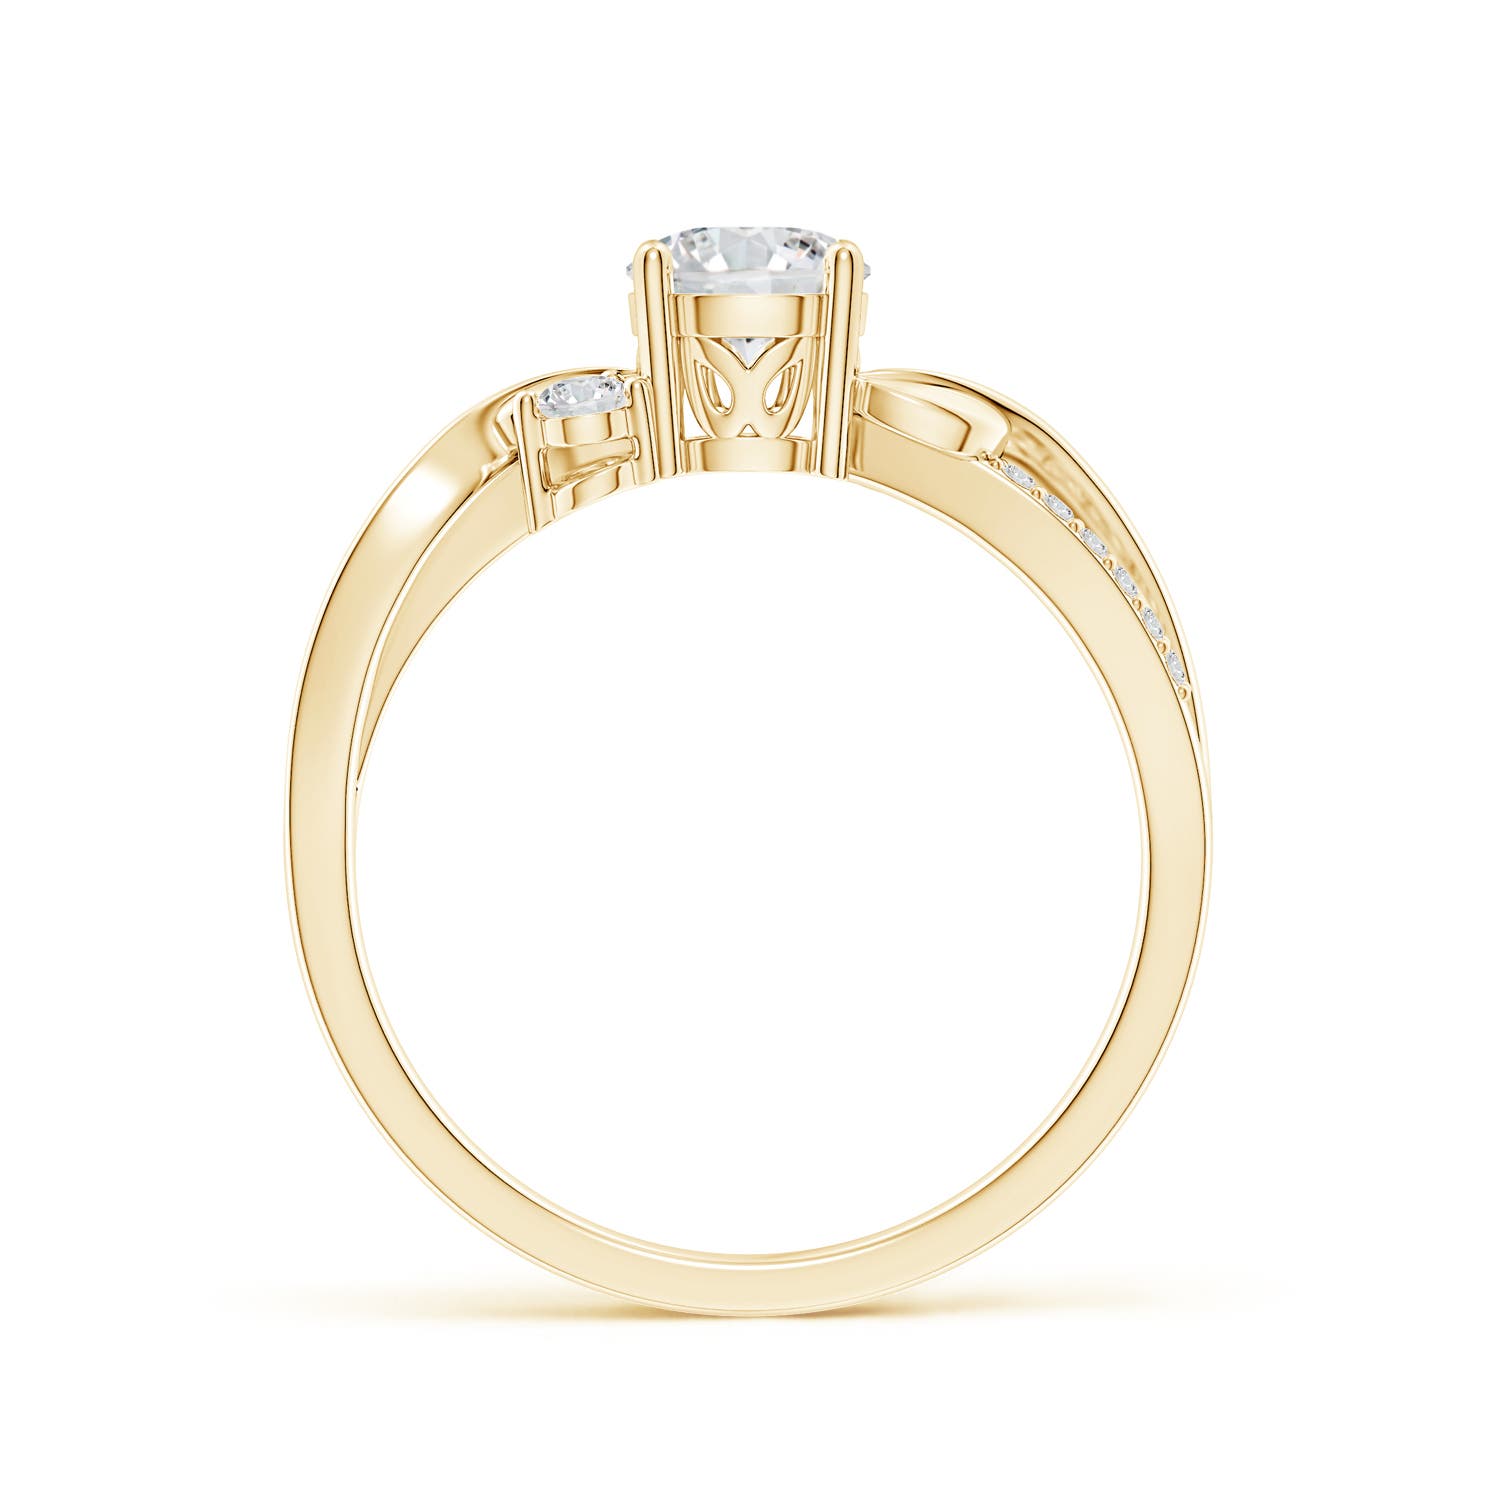 HSI2 / 0.74 CT / 14 KT Yellow Gold